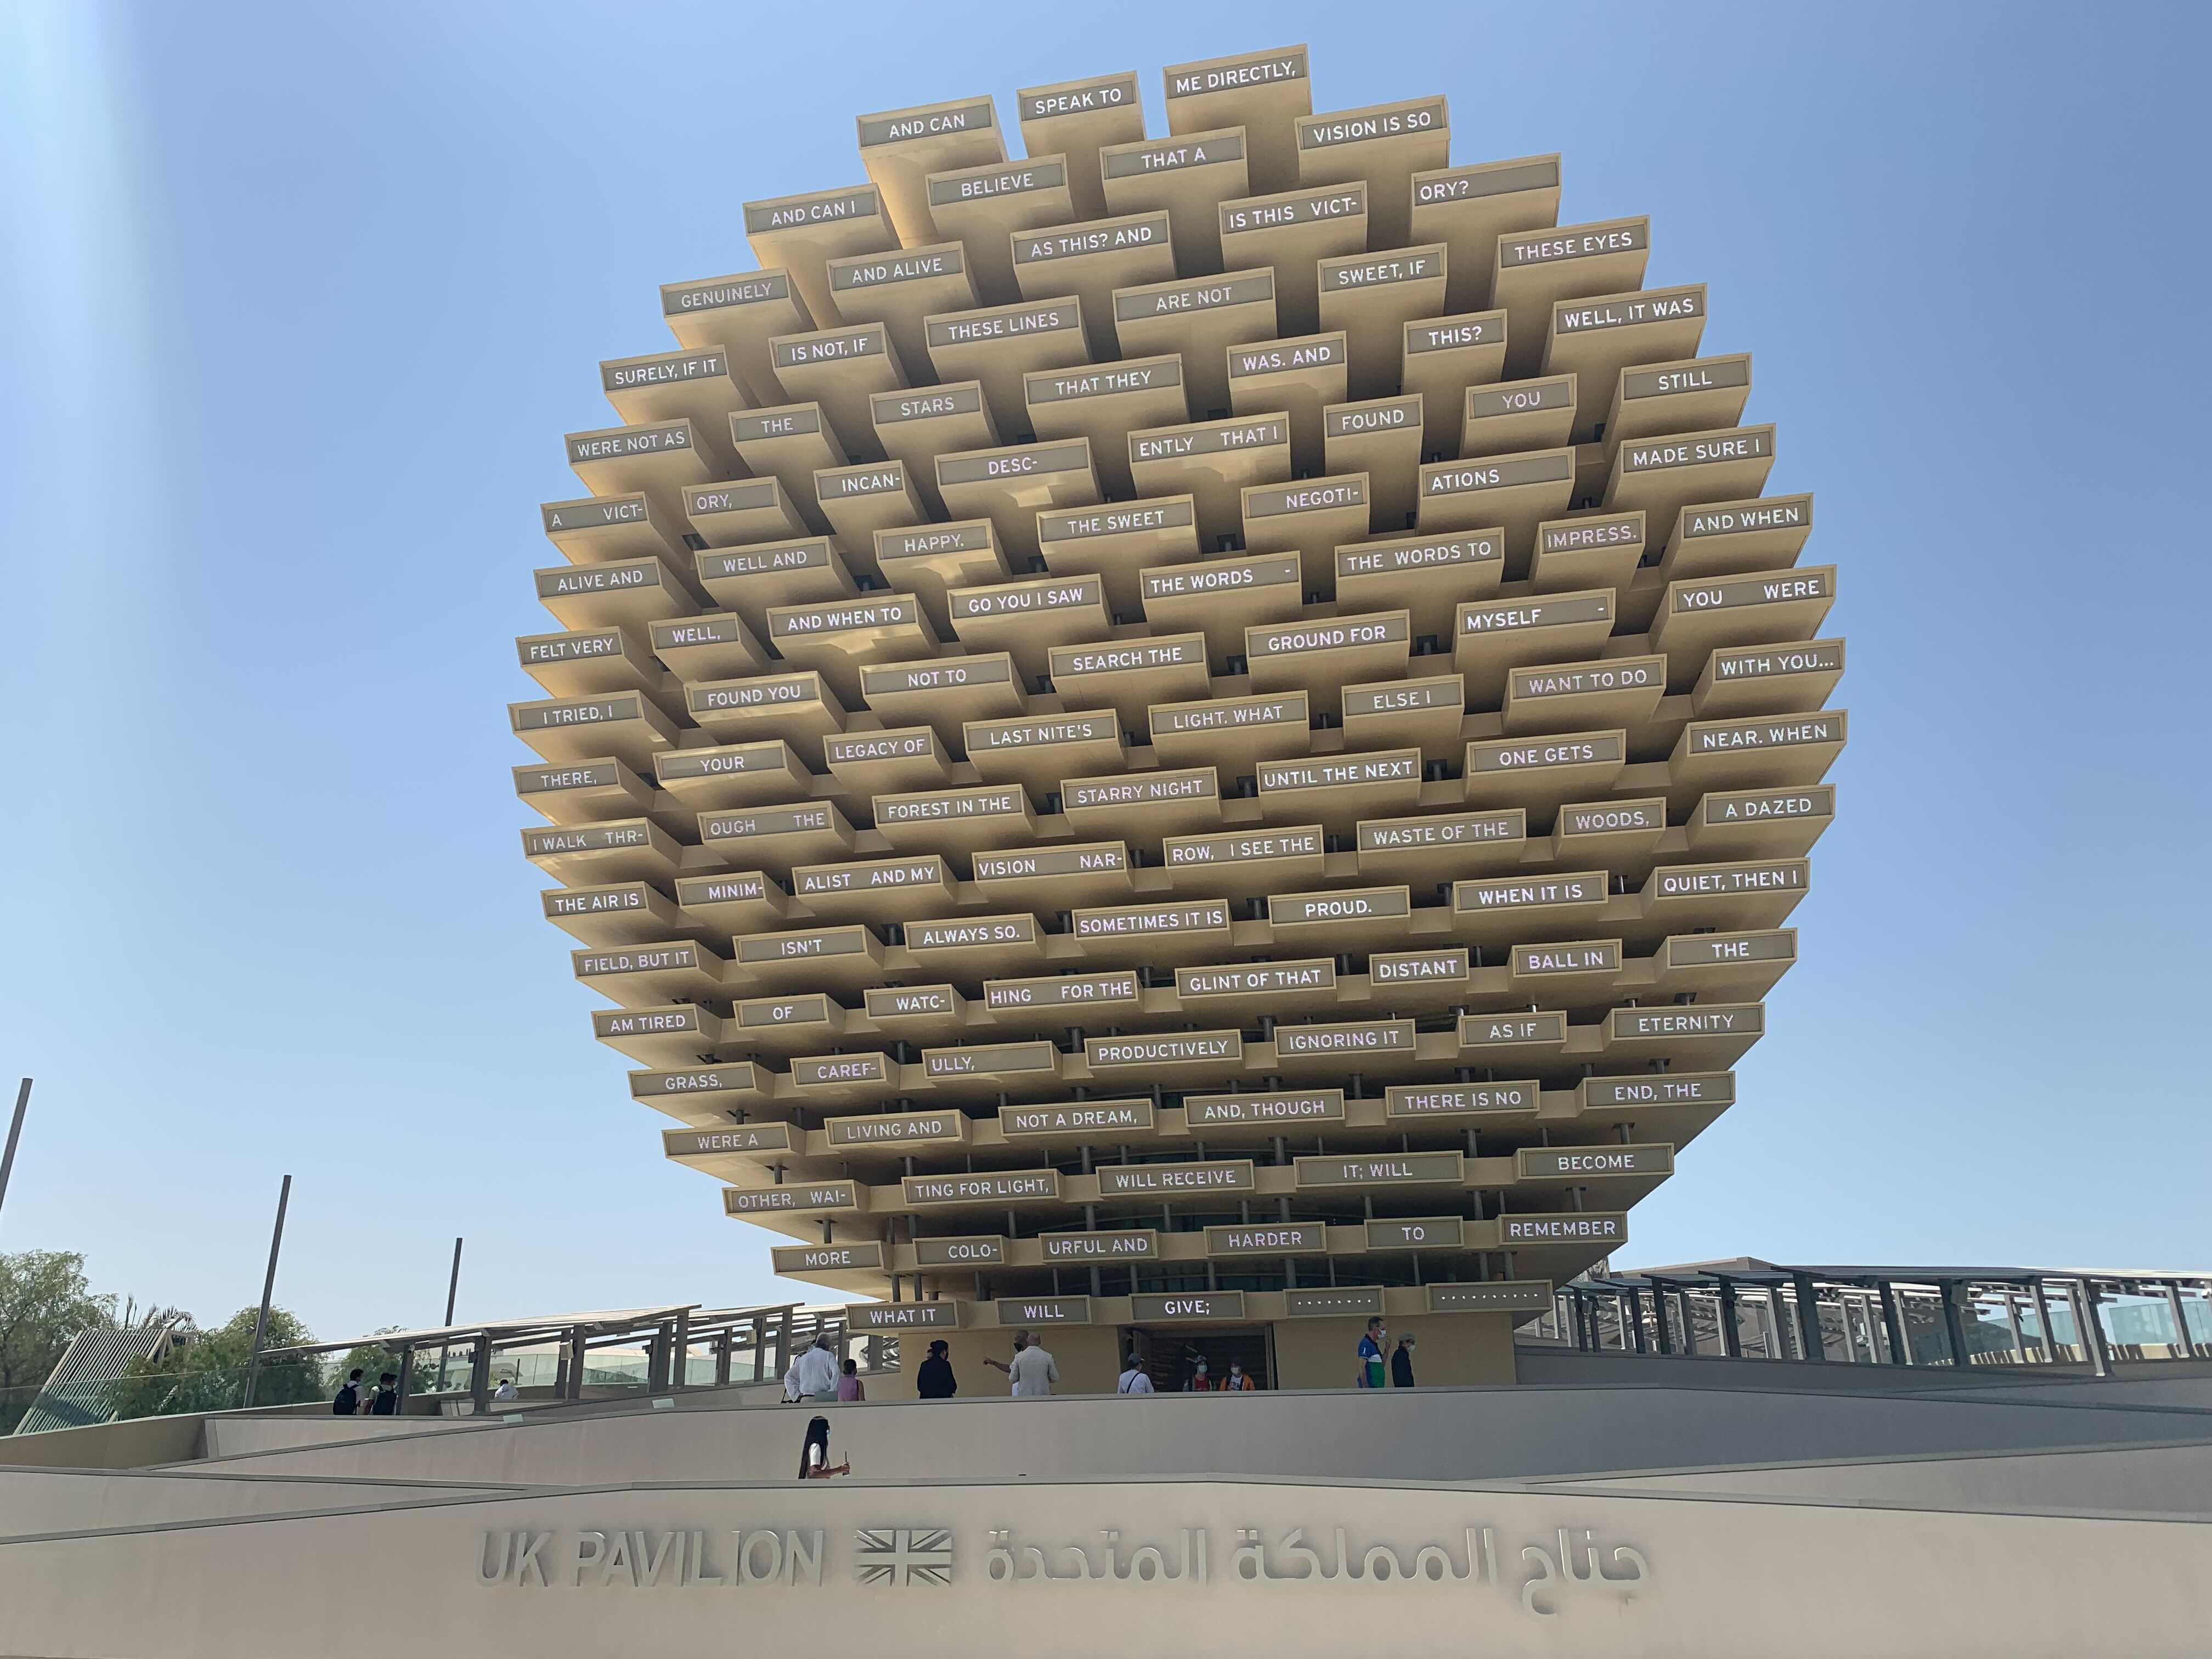 A first look at Expo 2020 Dubai